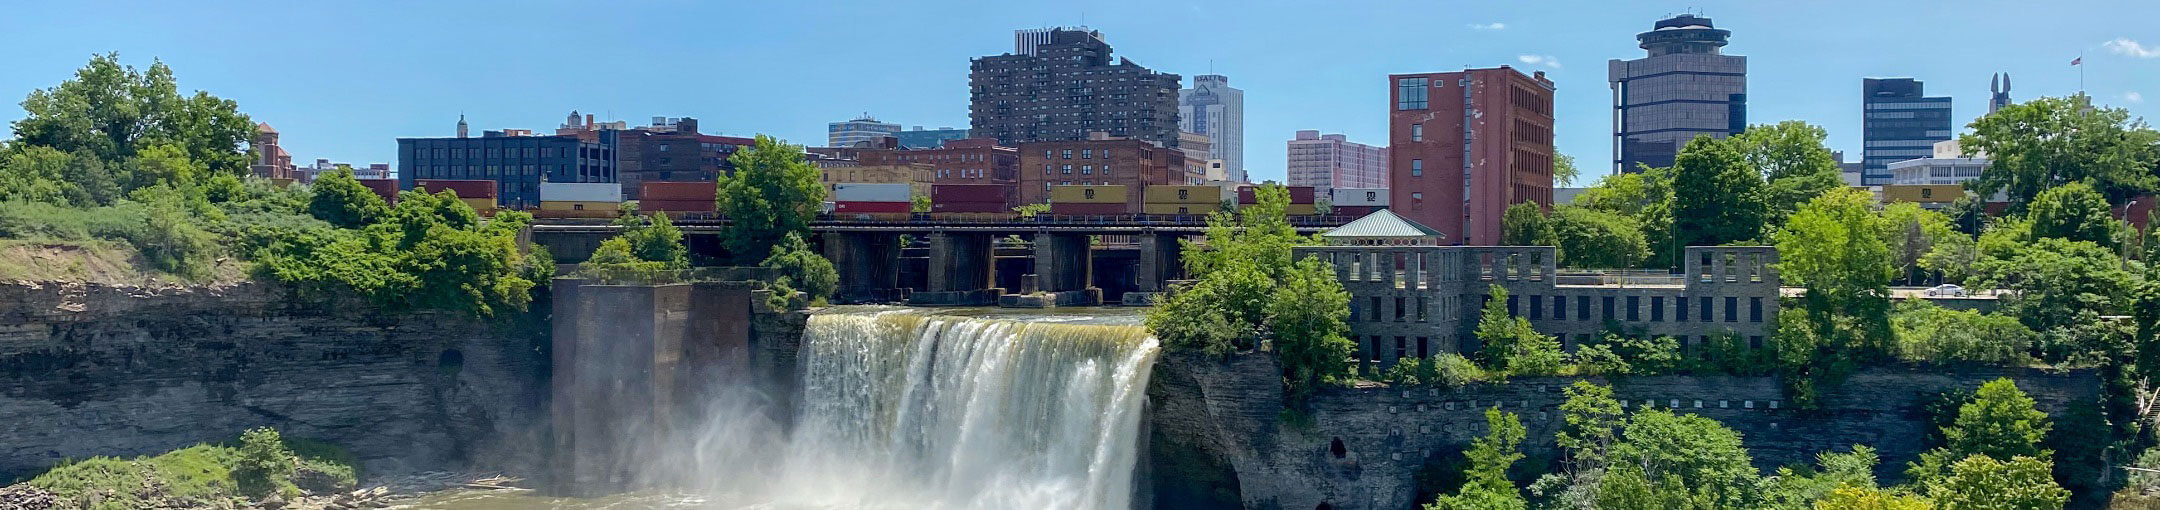 One of the waterfalls in Rochester with the Rochester skyline in the background.